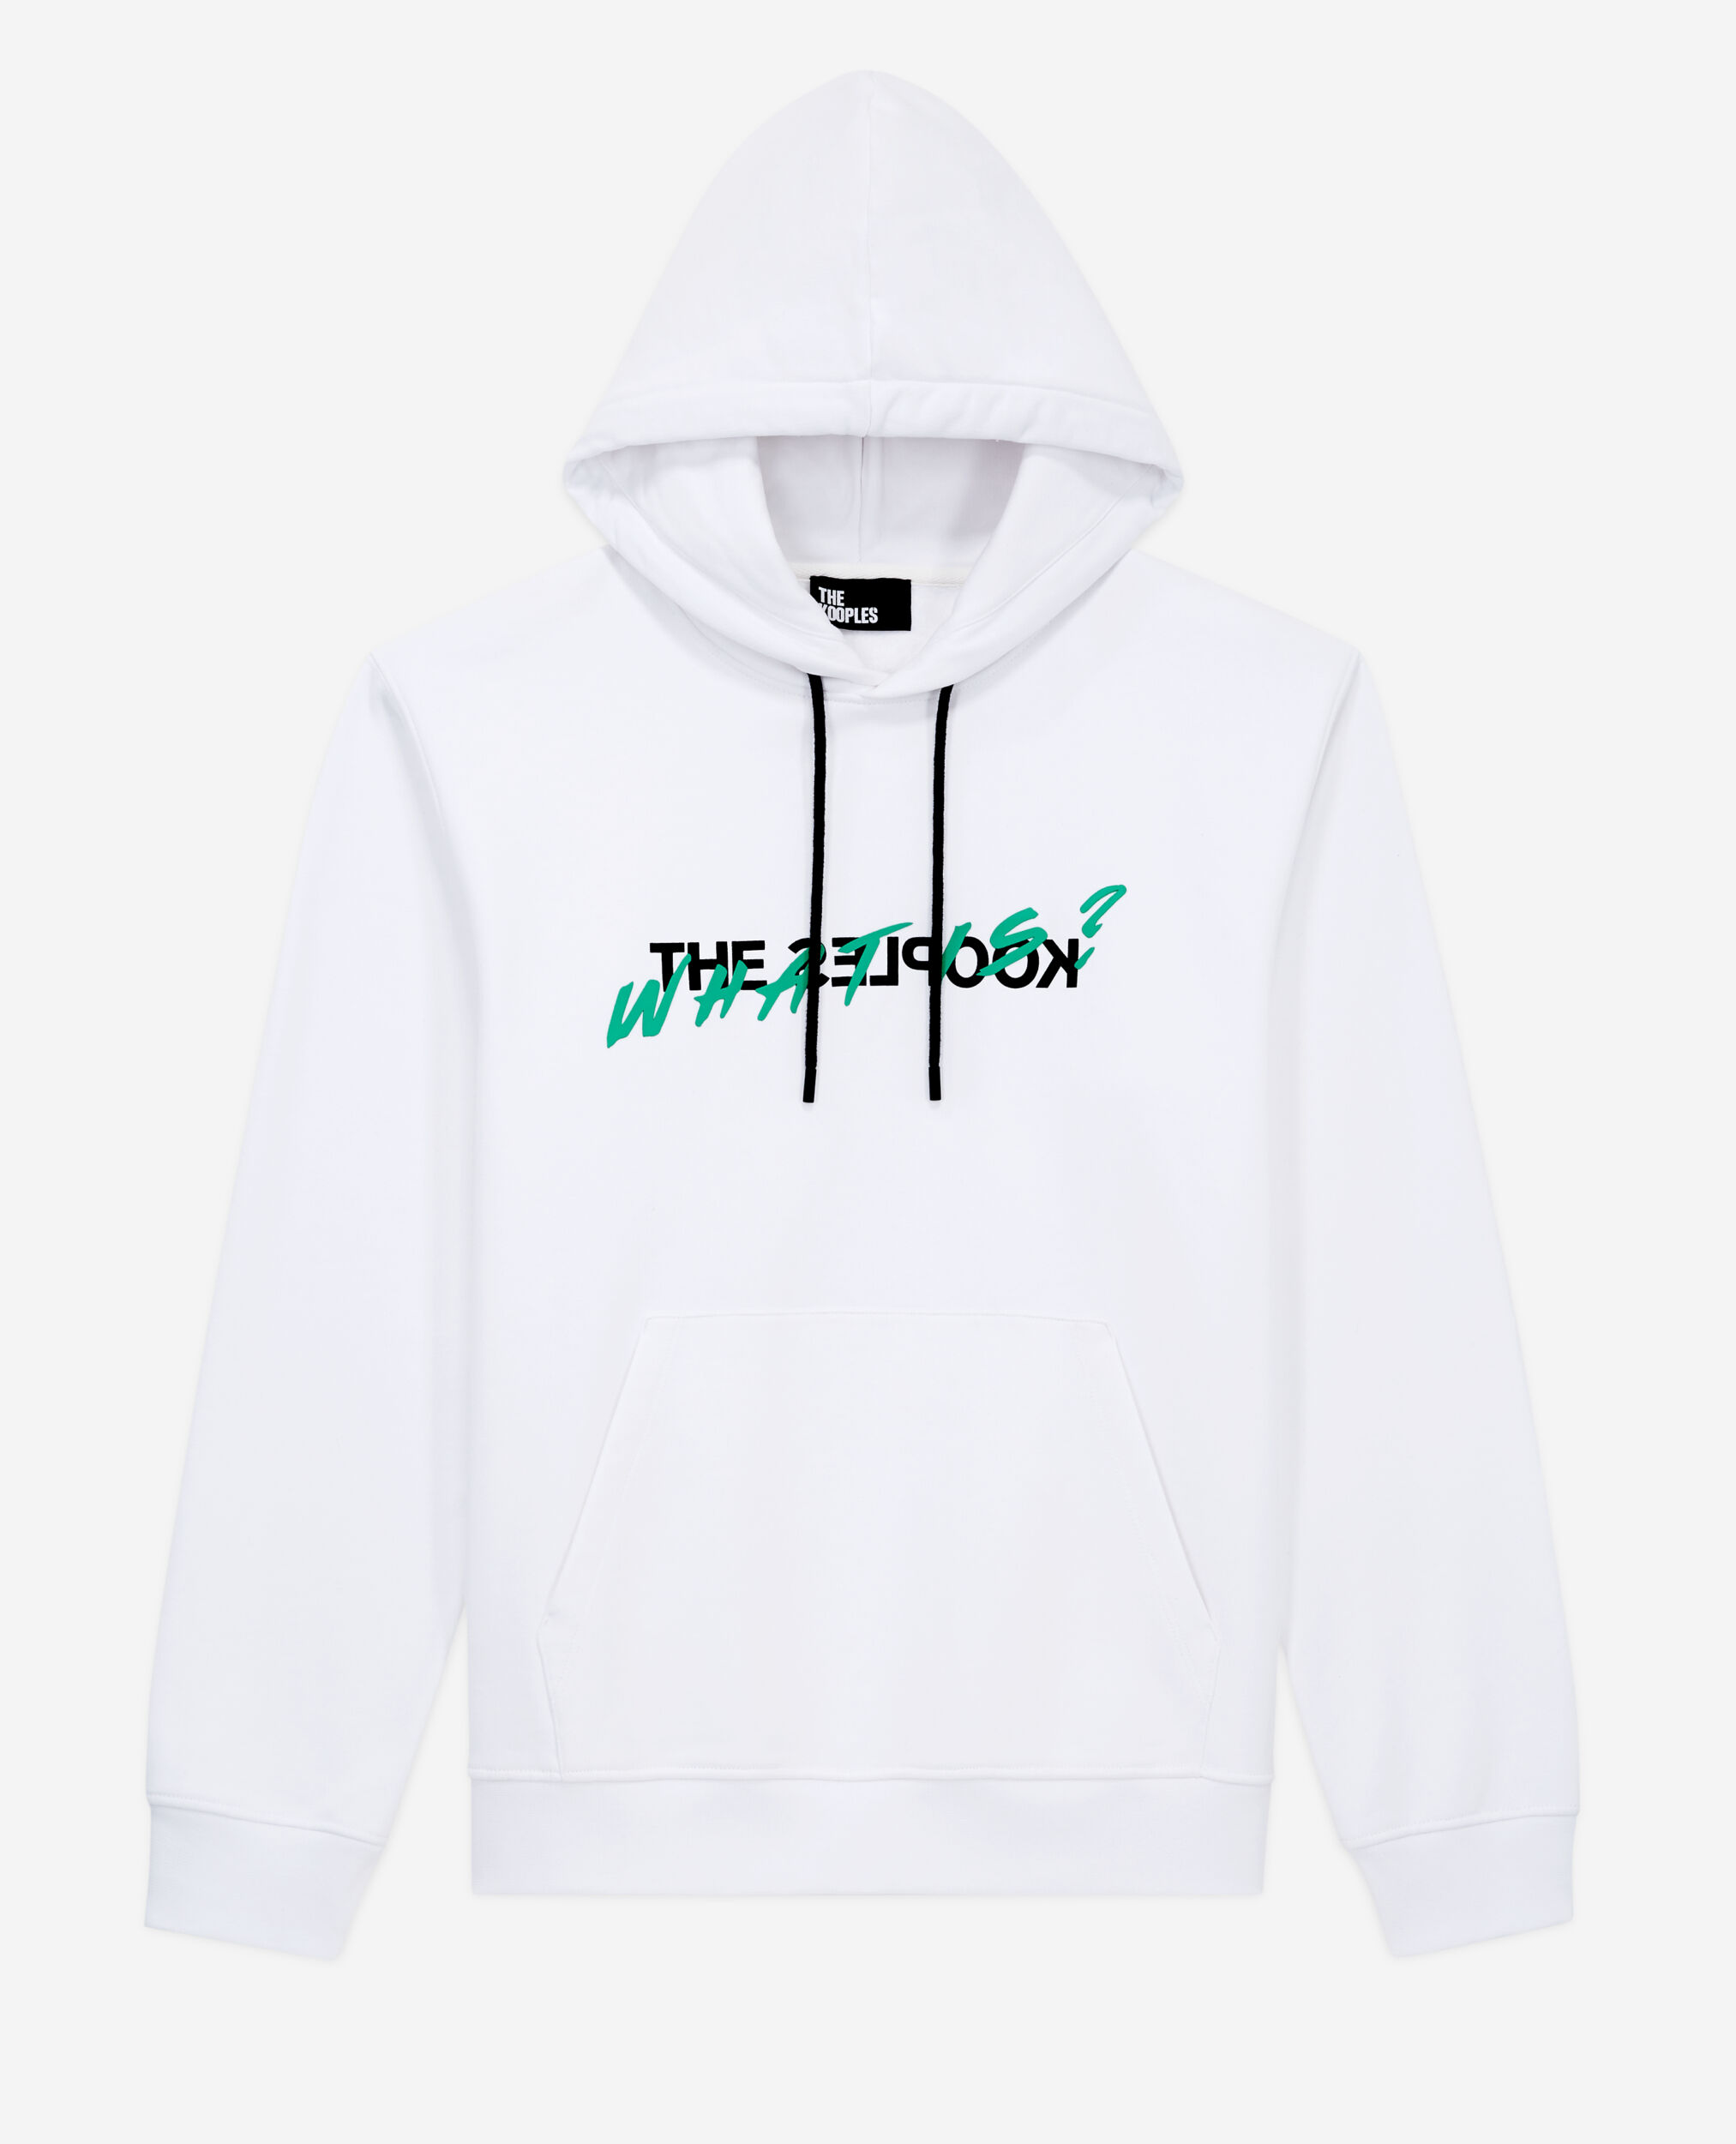 White What is sweatshirt, WHITE, hi-res image number null